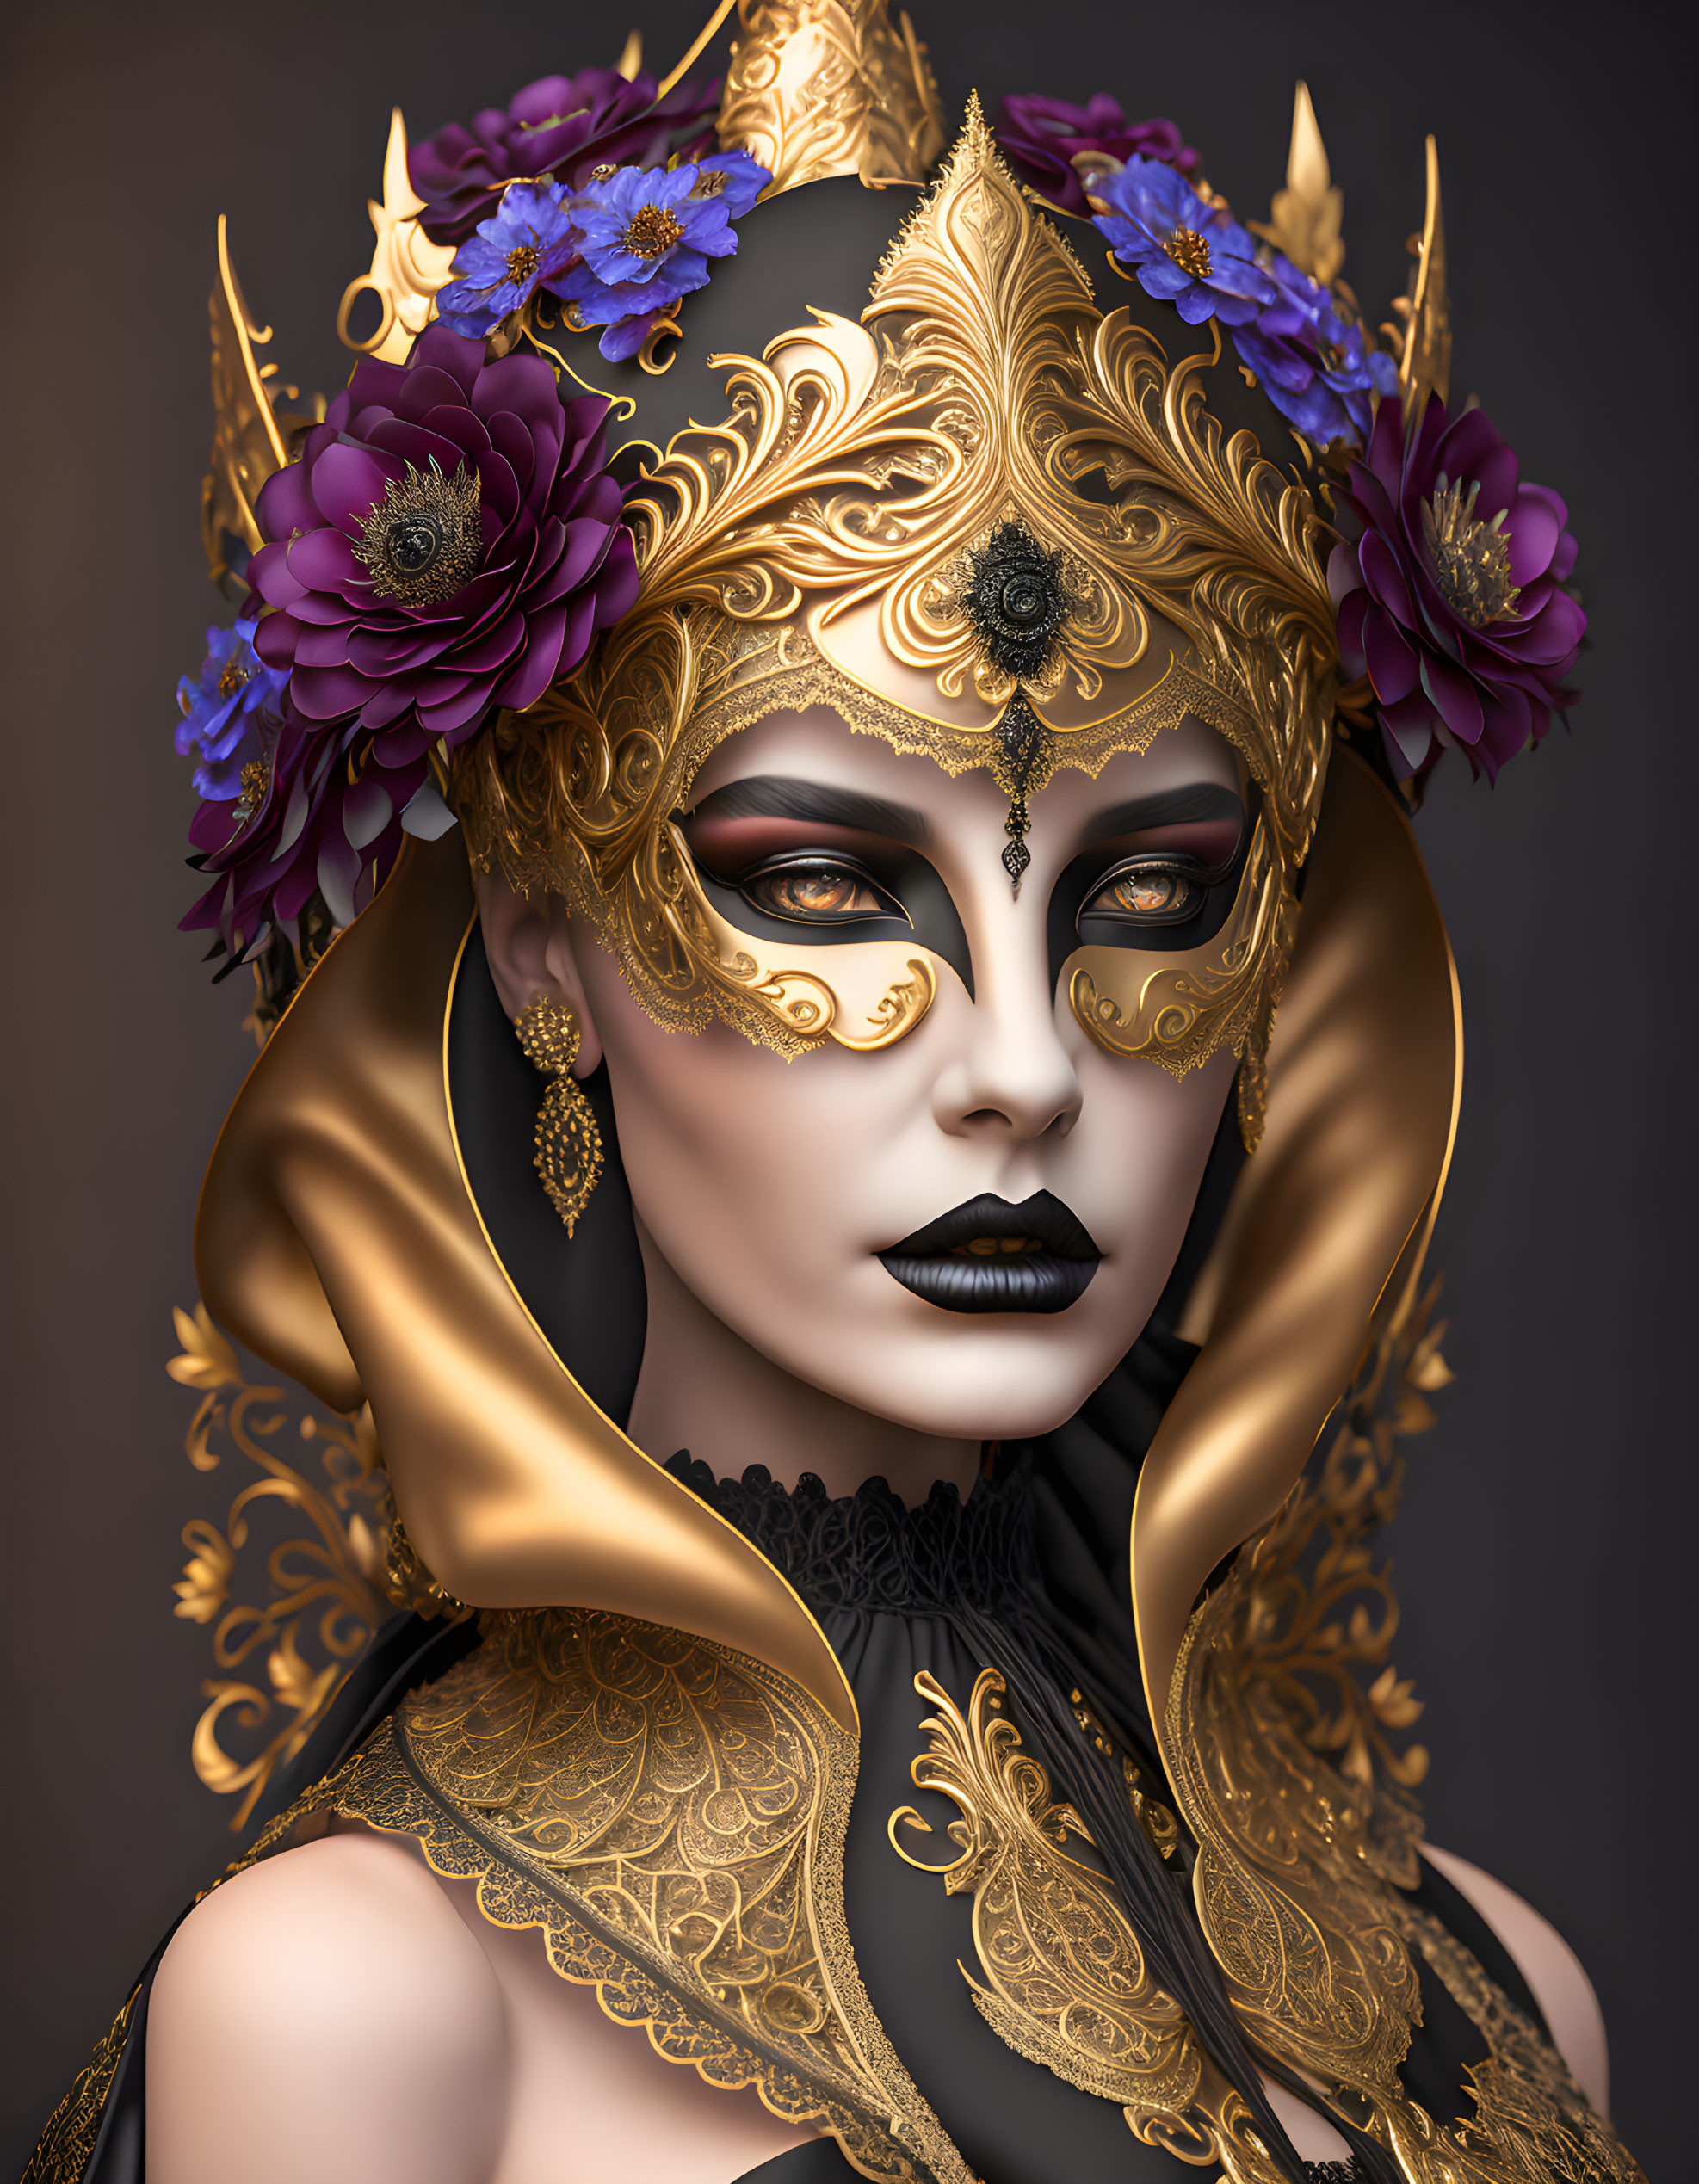 Person in ornate golden mask with purple flowers and regal headpiece on neutral background